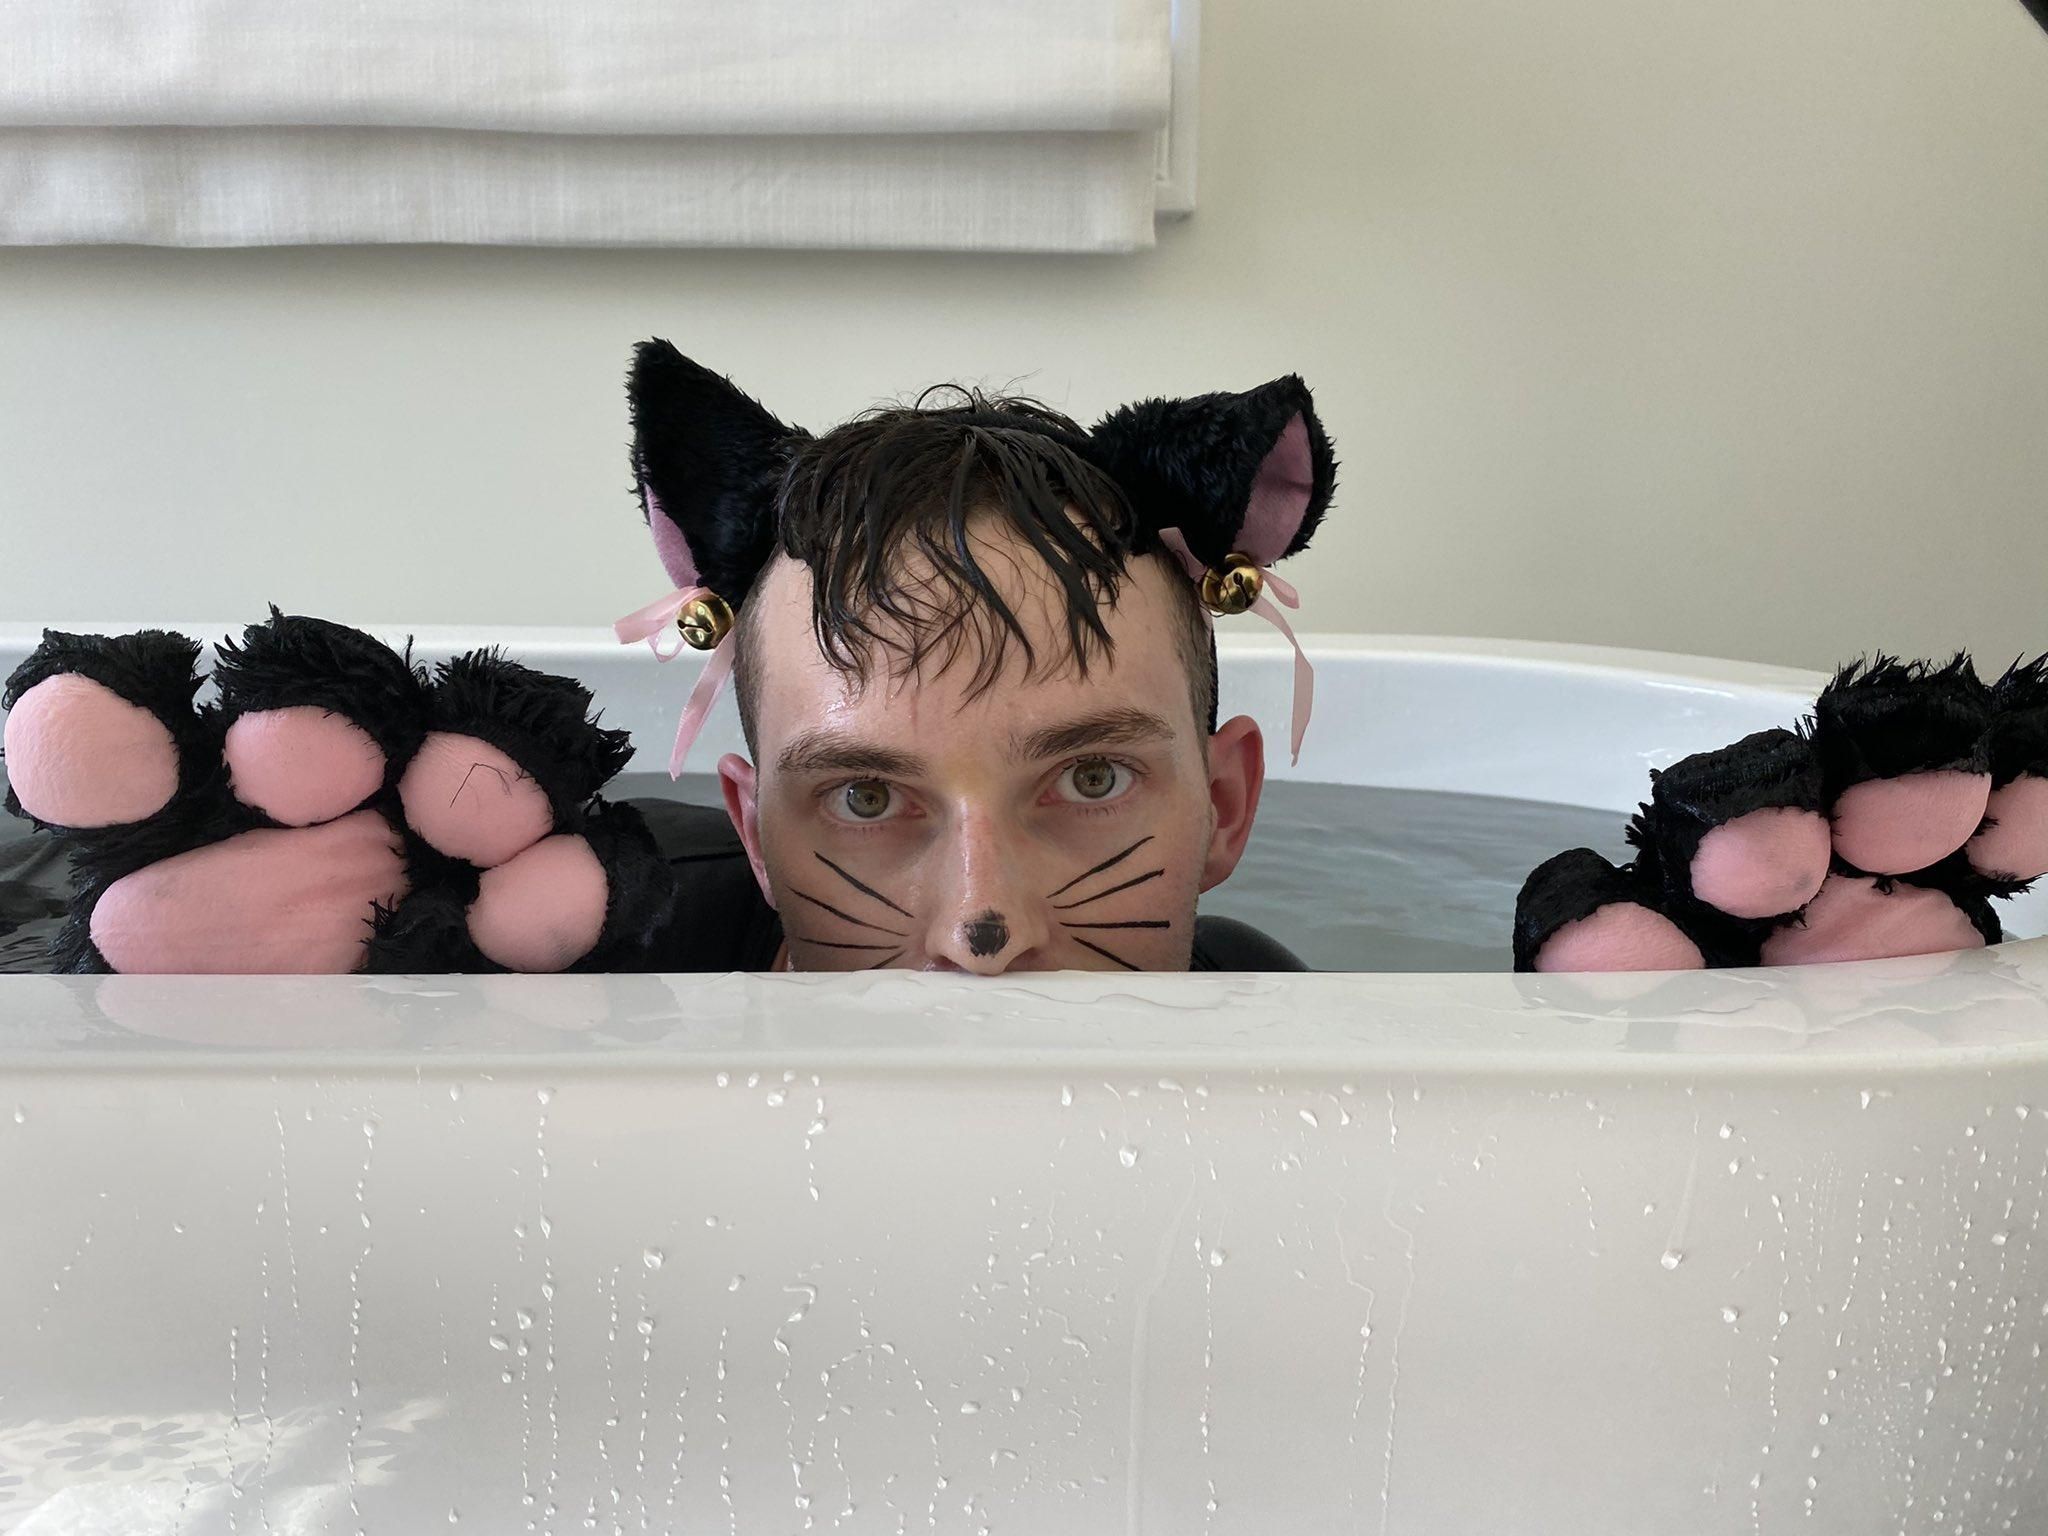 Adam Rippon in a tub for Halloween 2020